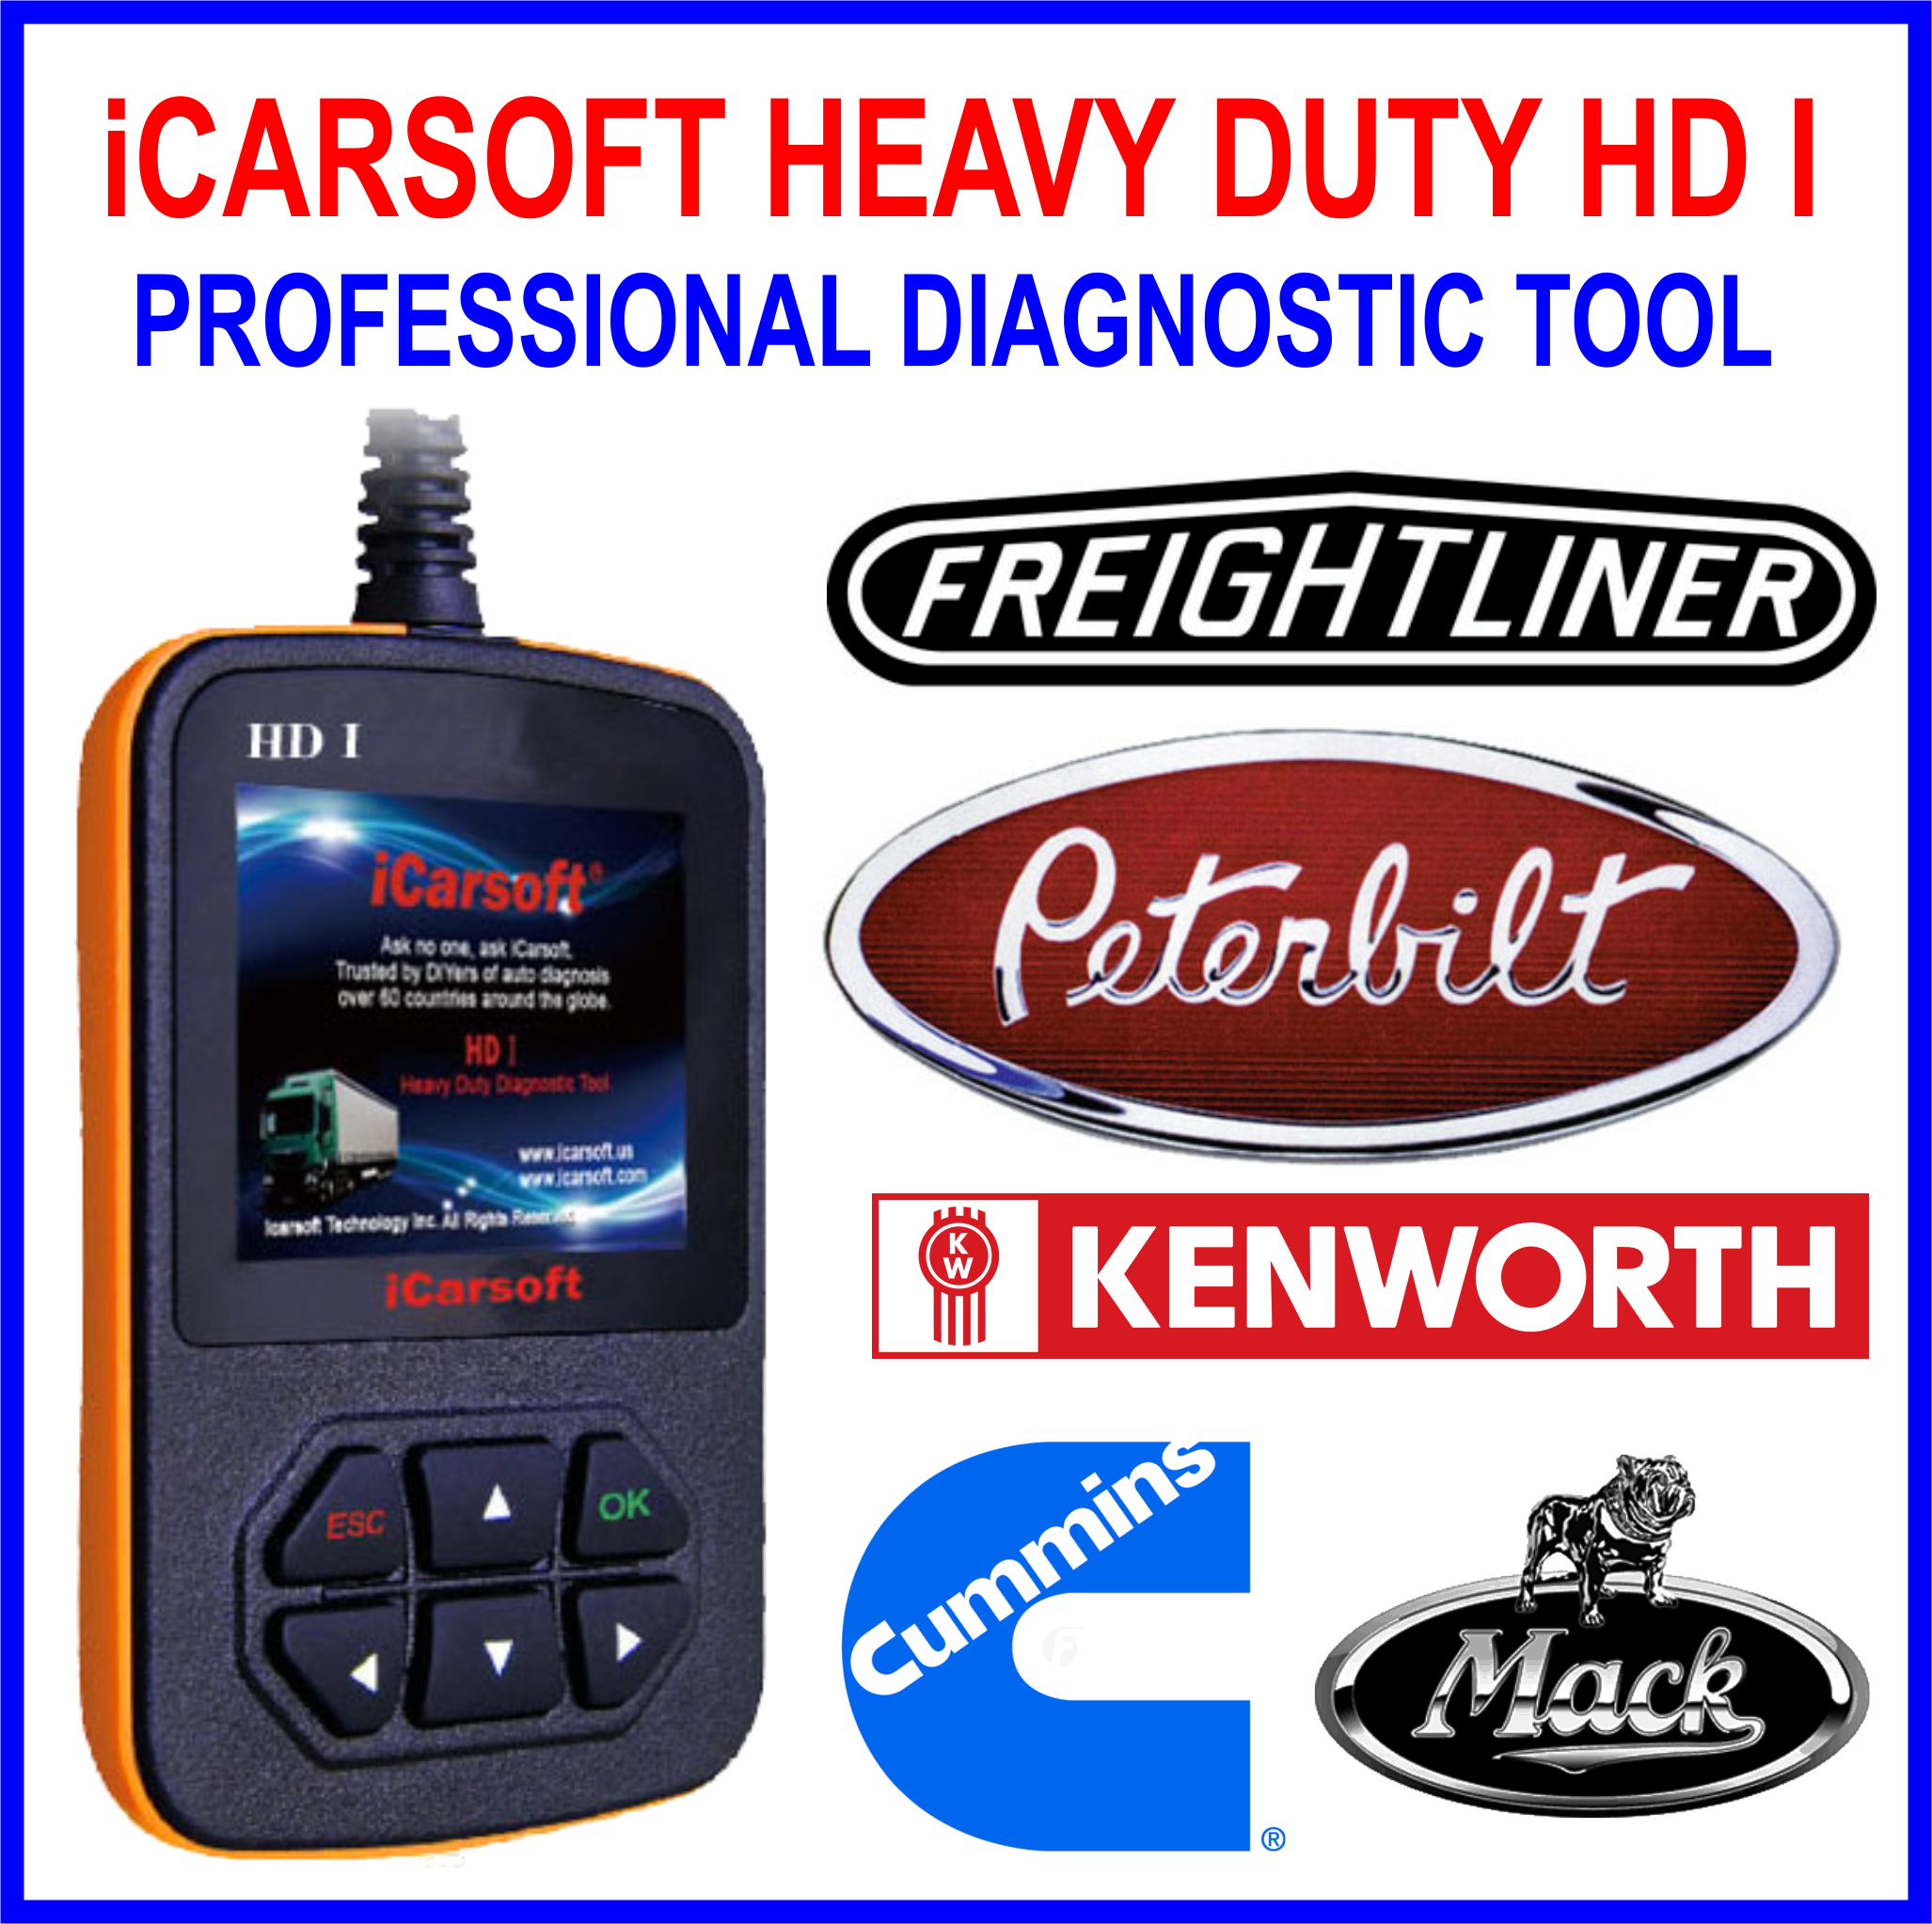 iCarsoft HEAVY DUTY HDI Diagnostic Scanner for Peterbilt Cummins Mack and more